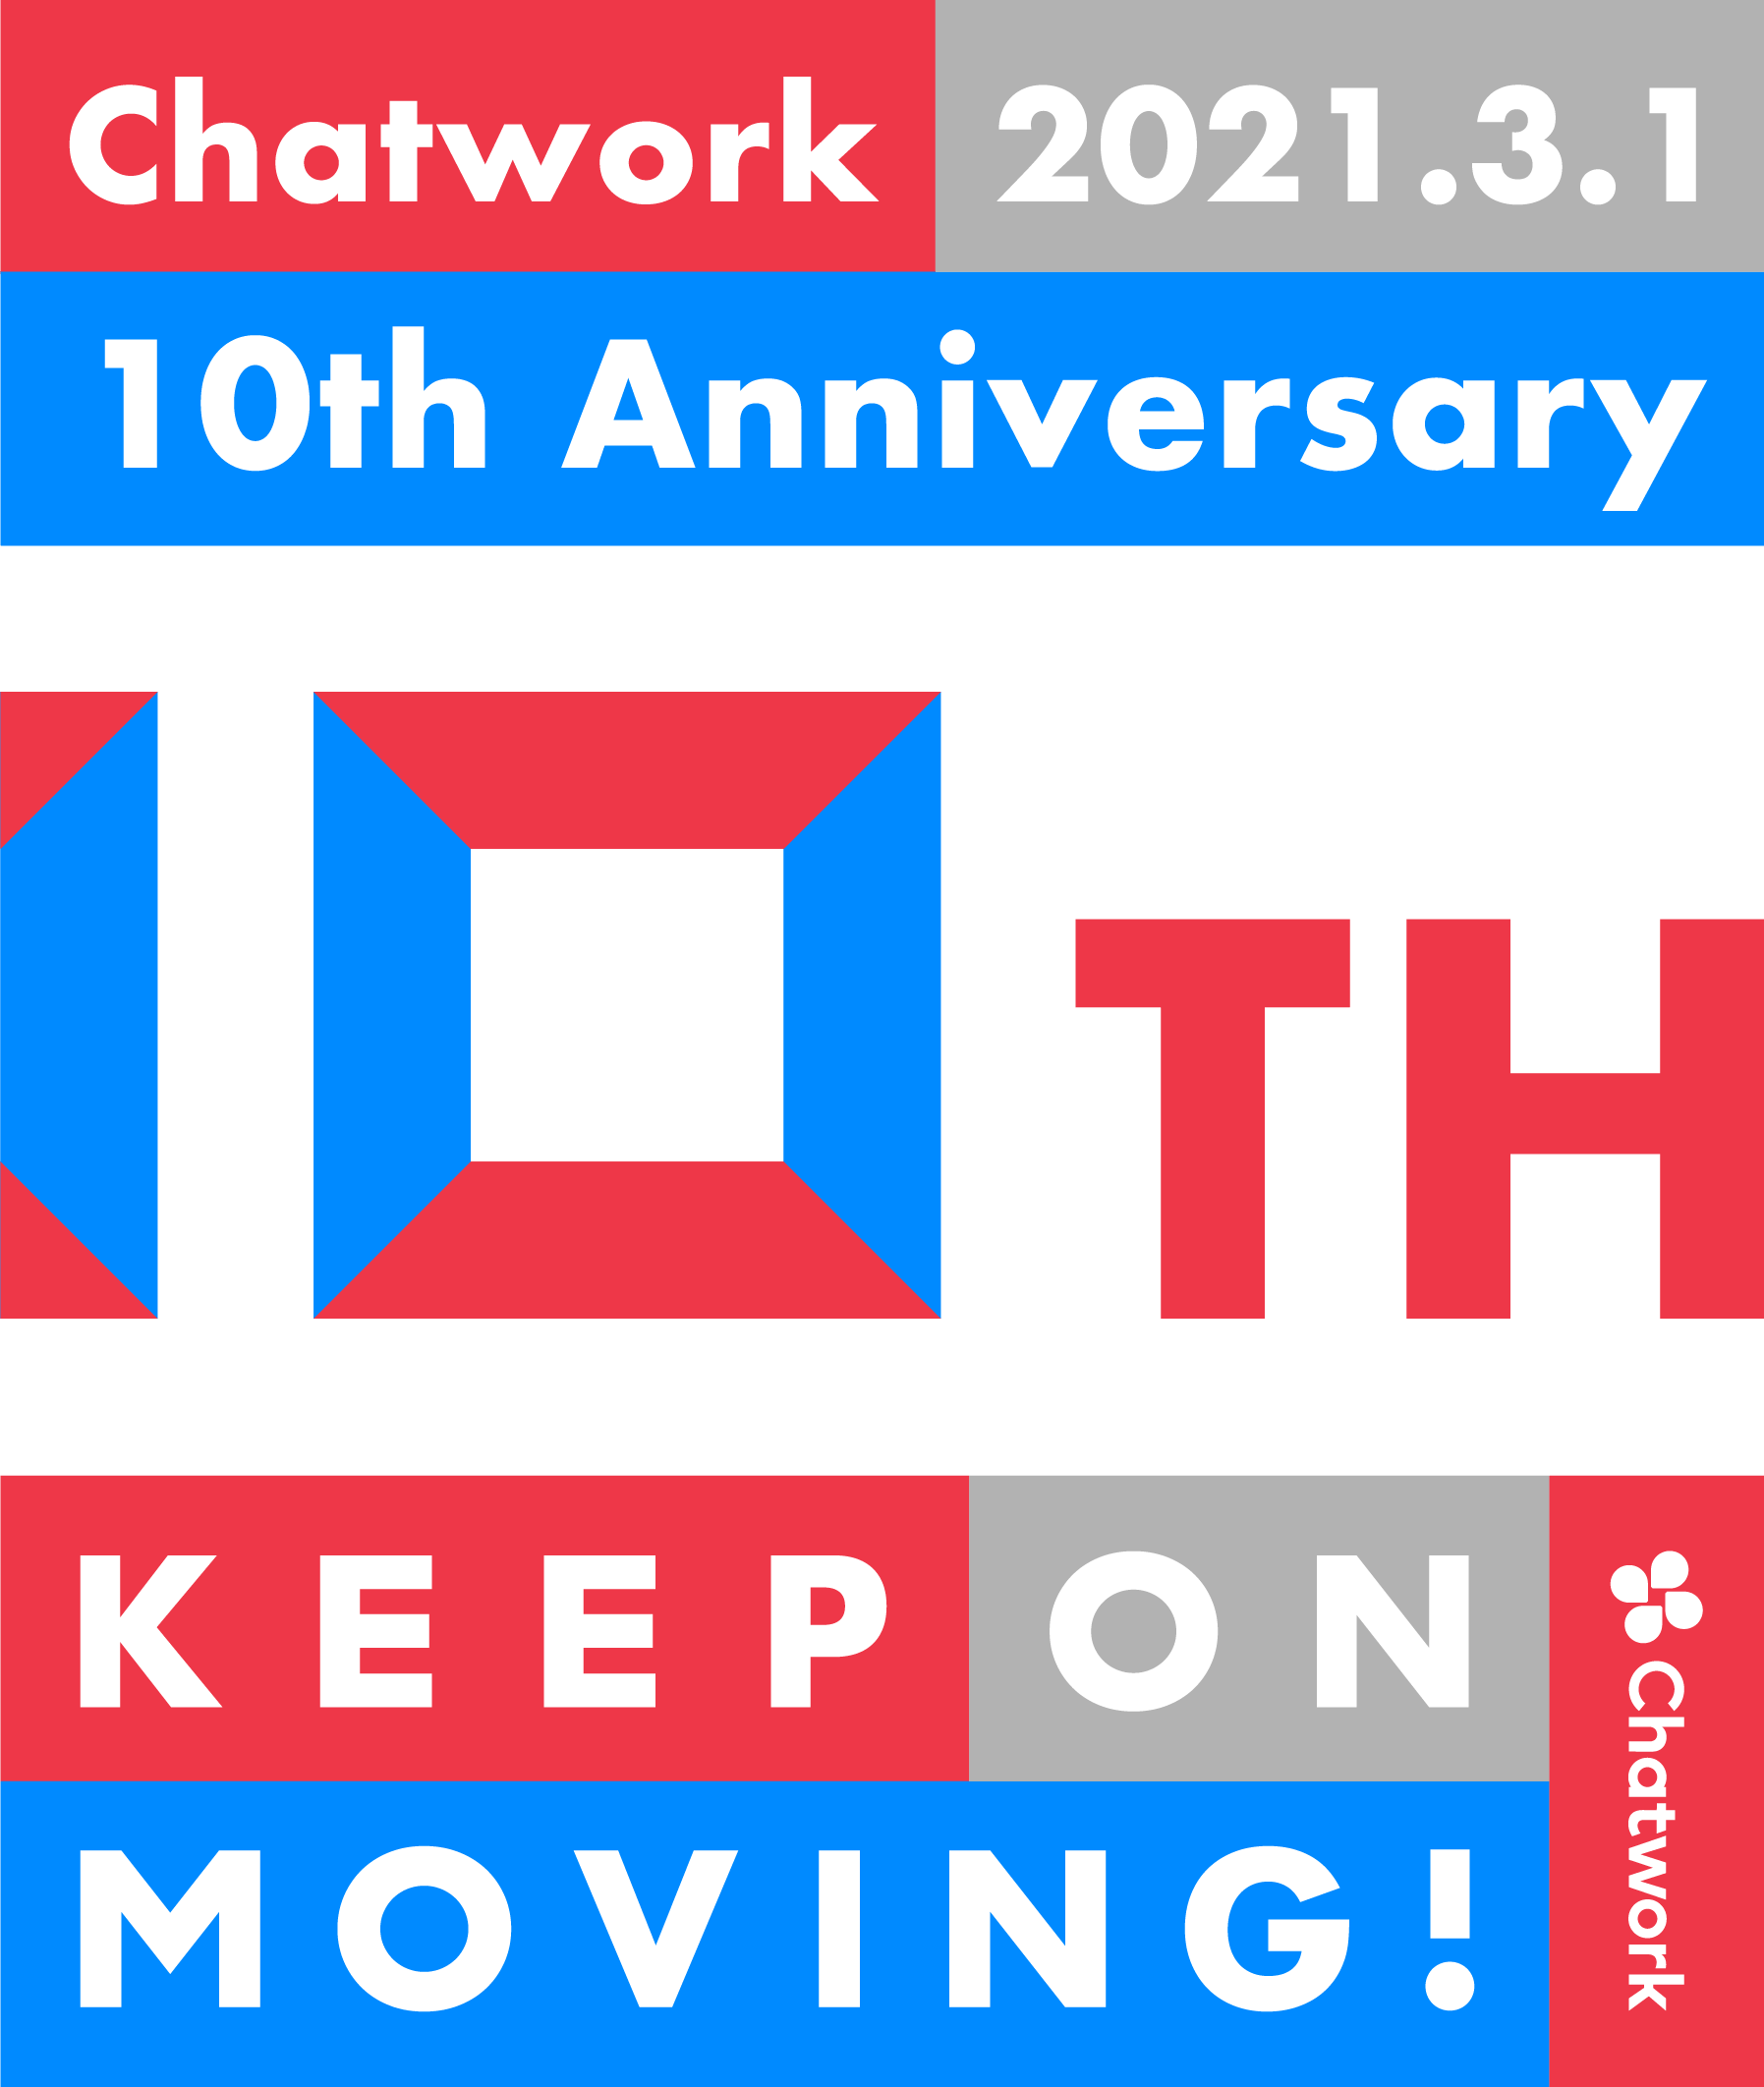 2021.3.1　Chatwork 10th Anniversary KEEP ON MOVING!